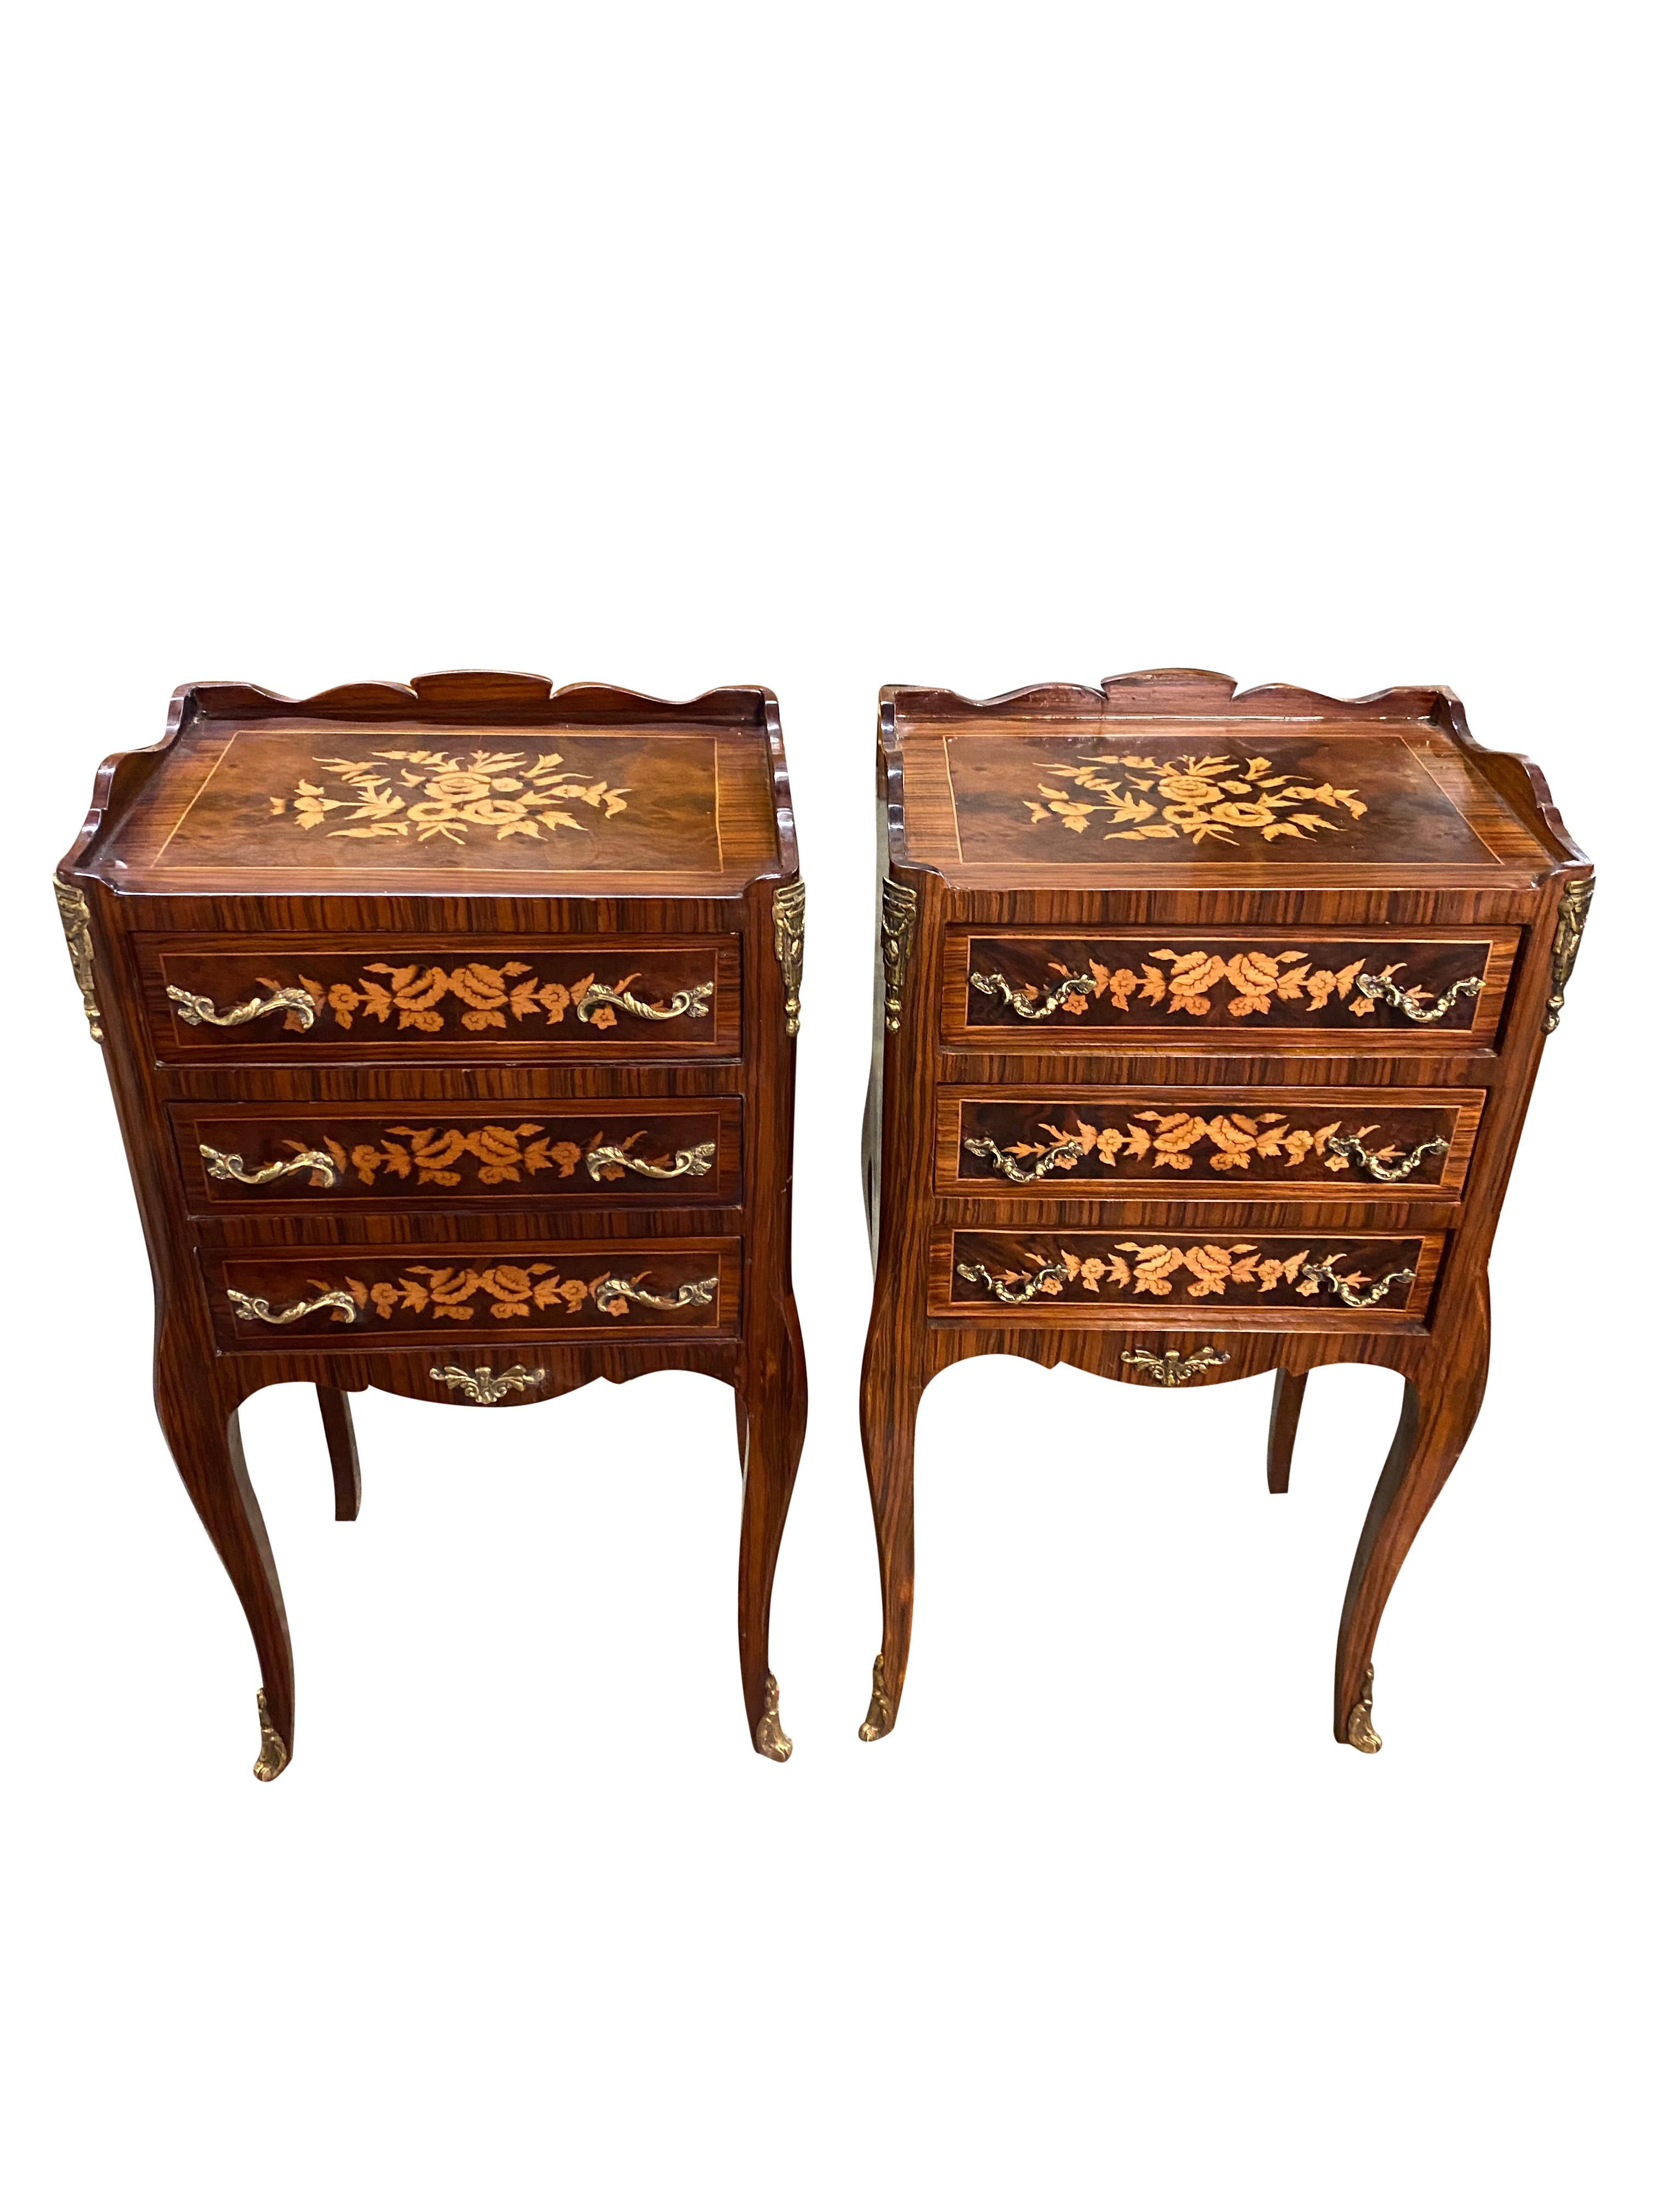 Pair of 20th Century English Regency Style Side Tables For Sale 9